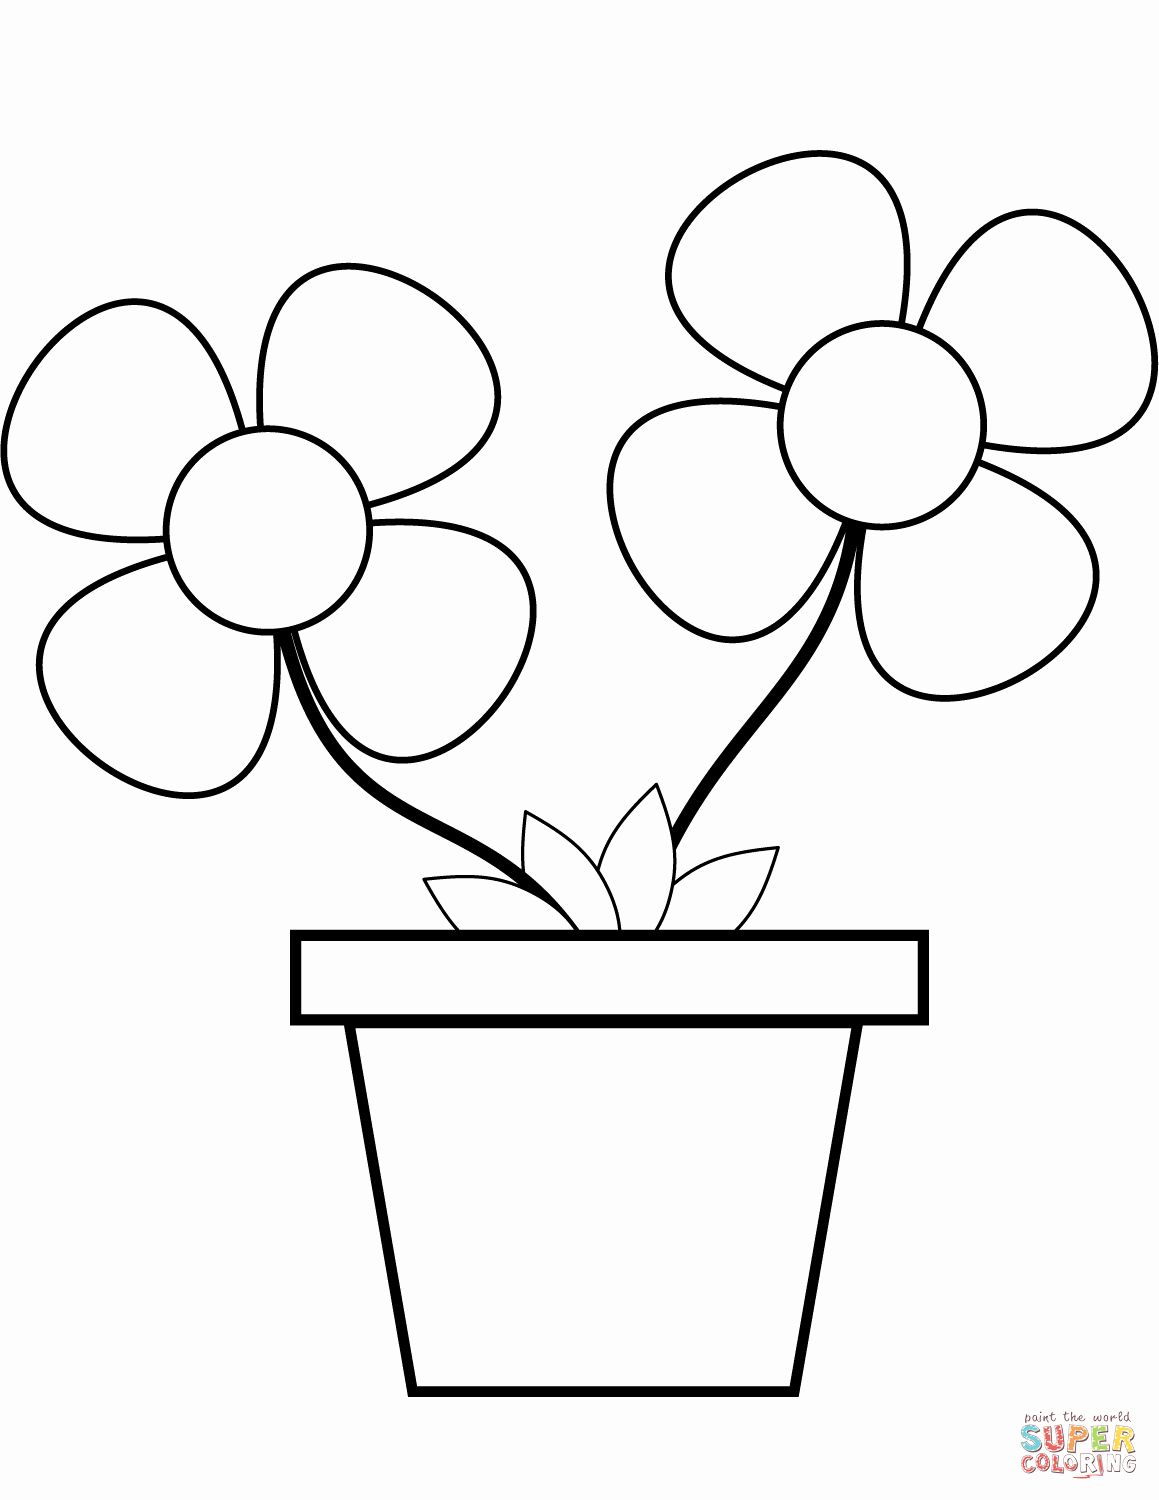 Flower Pot Coloring Page Elegant Flowers In A Pot Coloring Page | Printable flower  coloring pages, Flower coloring pages, Free printable coloring pages